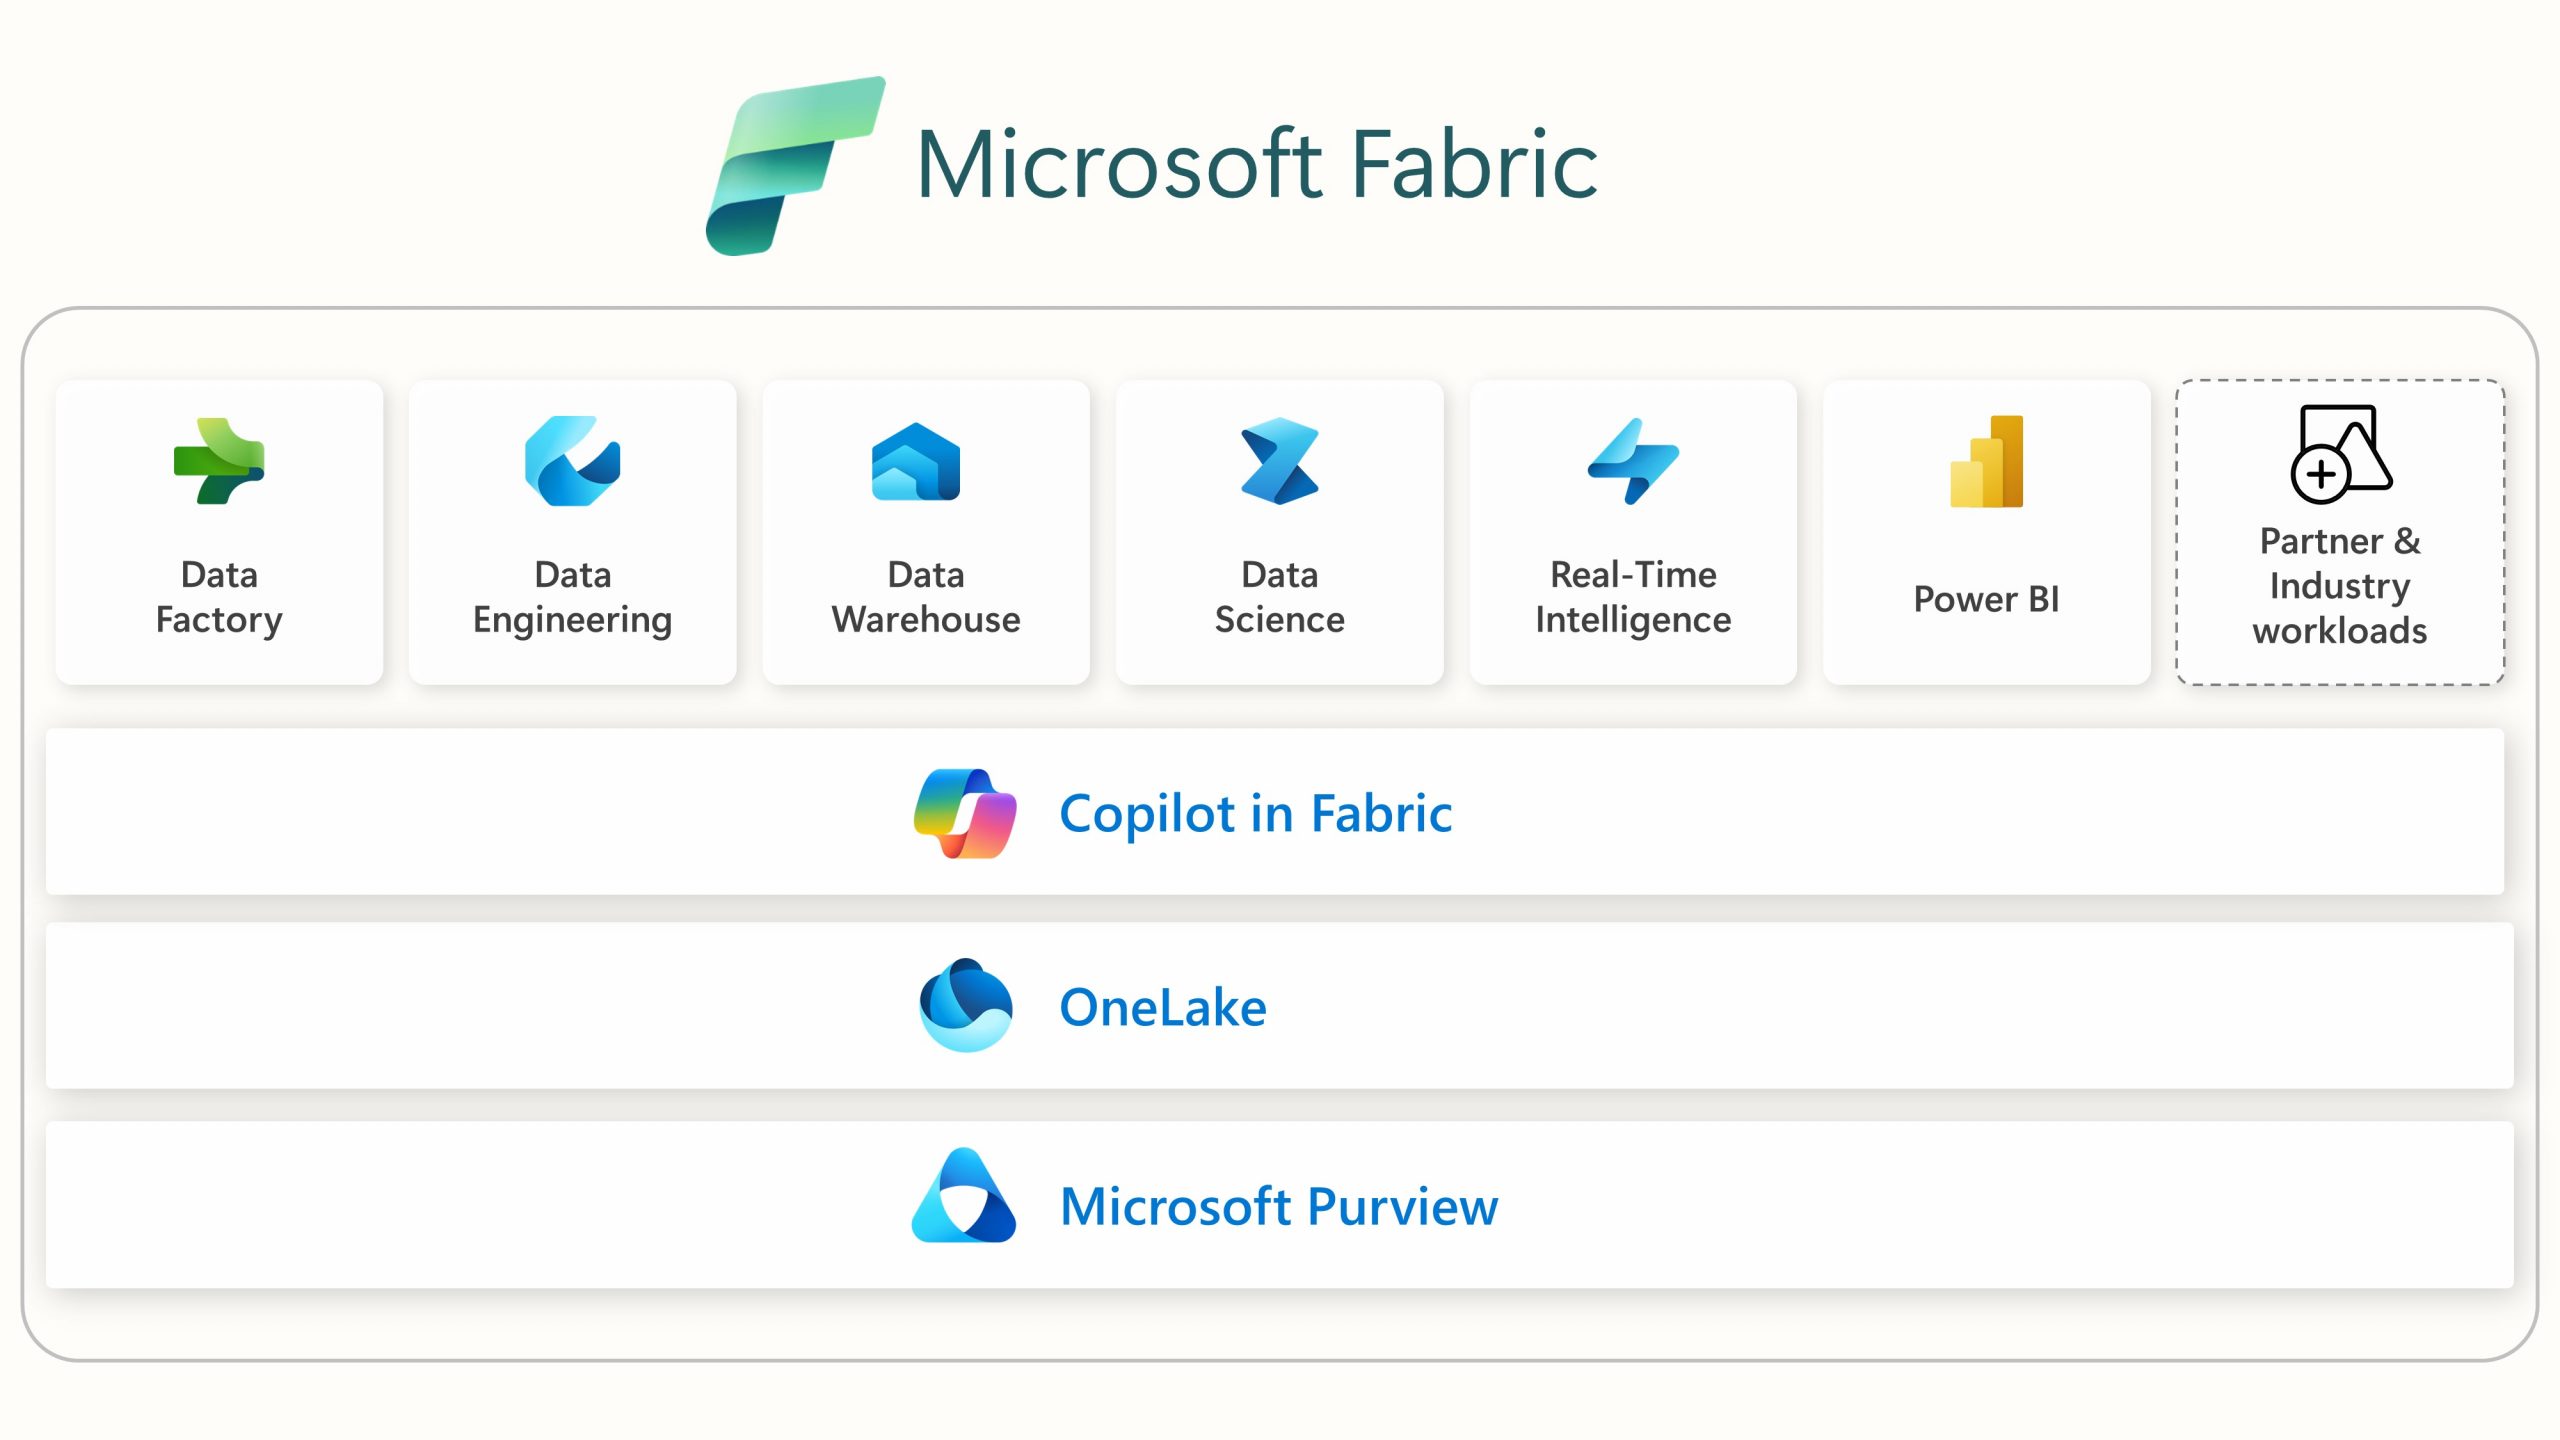 An image depicting the 7 workloads of Microsoft Fabric and the three underpinnings including Copilot in Fabric, OneLake, and Microsoft Purview